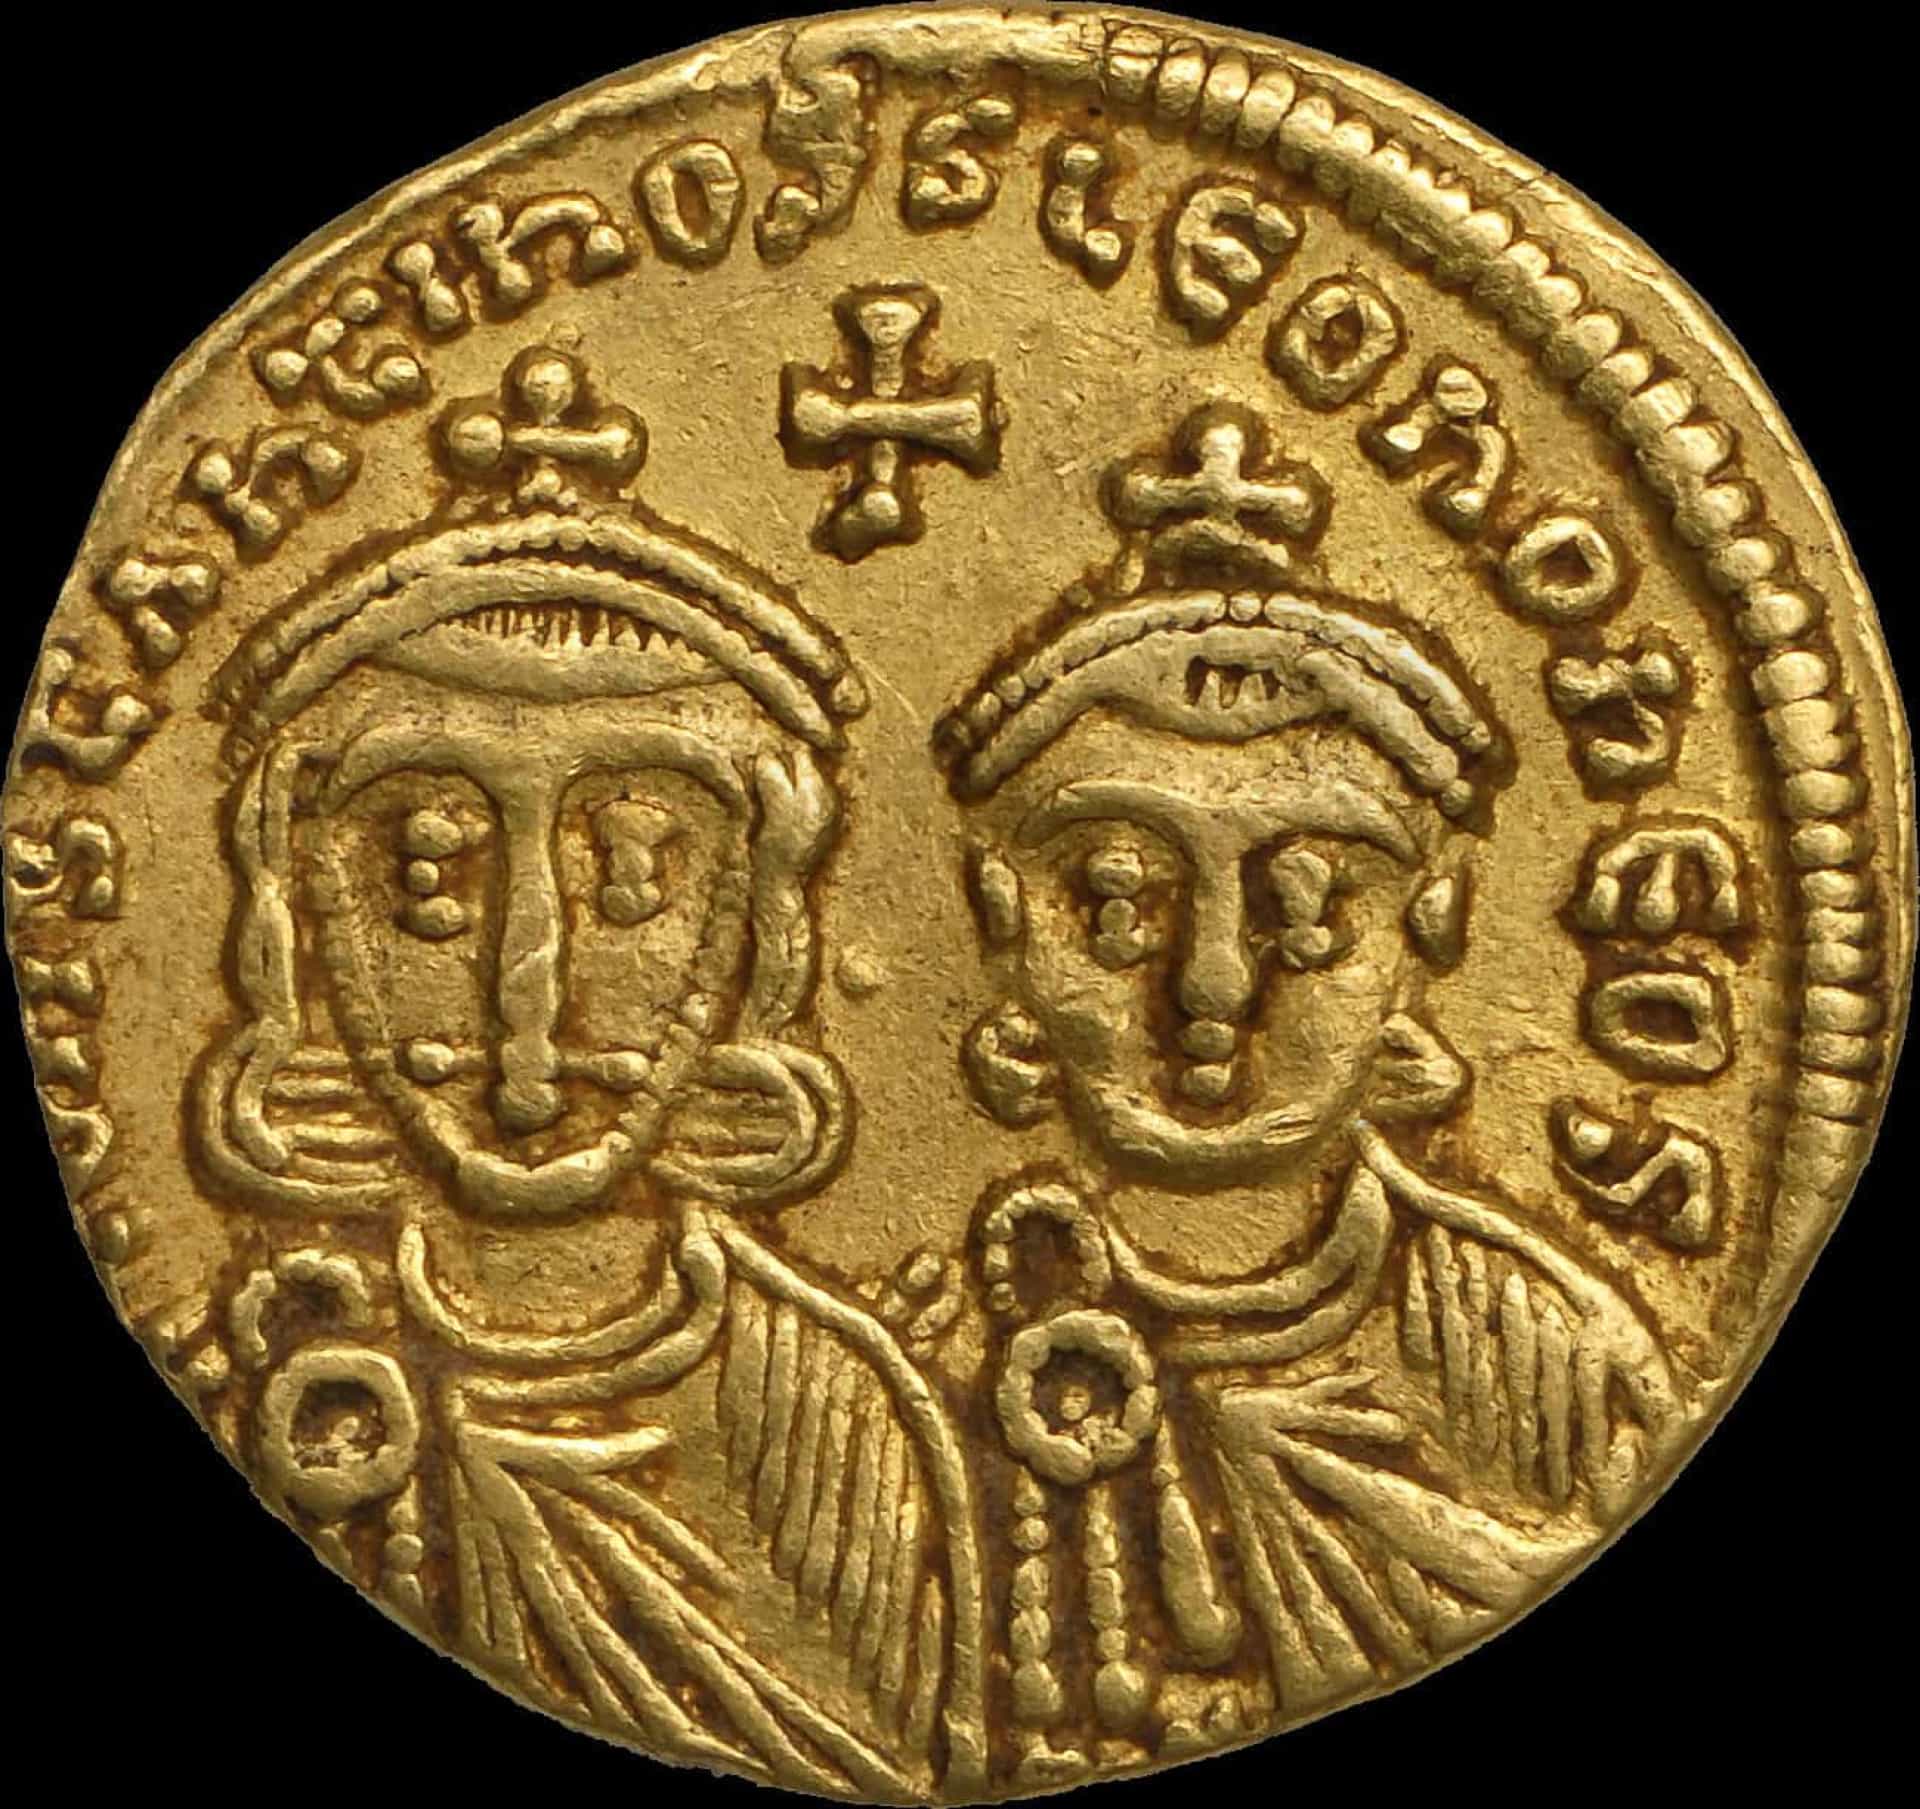 <p>The Byzantine emperor from 741 to 775 garnered a lot of haters after he made it clear he was against the use of icons in the Christian church. He earned the nickname Kopronymos, which combines<em> kopros</em> ("feces" or "manure") and <em>onoma</em> ("name") to make "Dung-Named."</p>